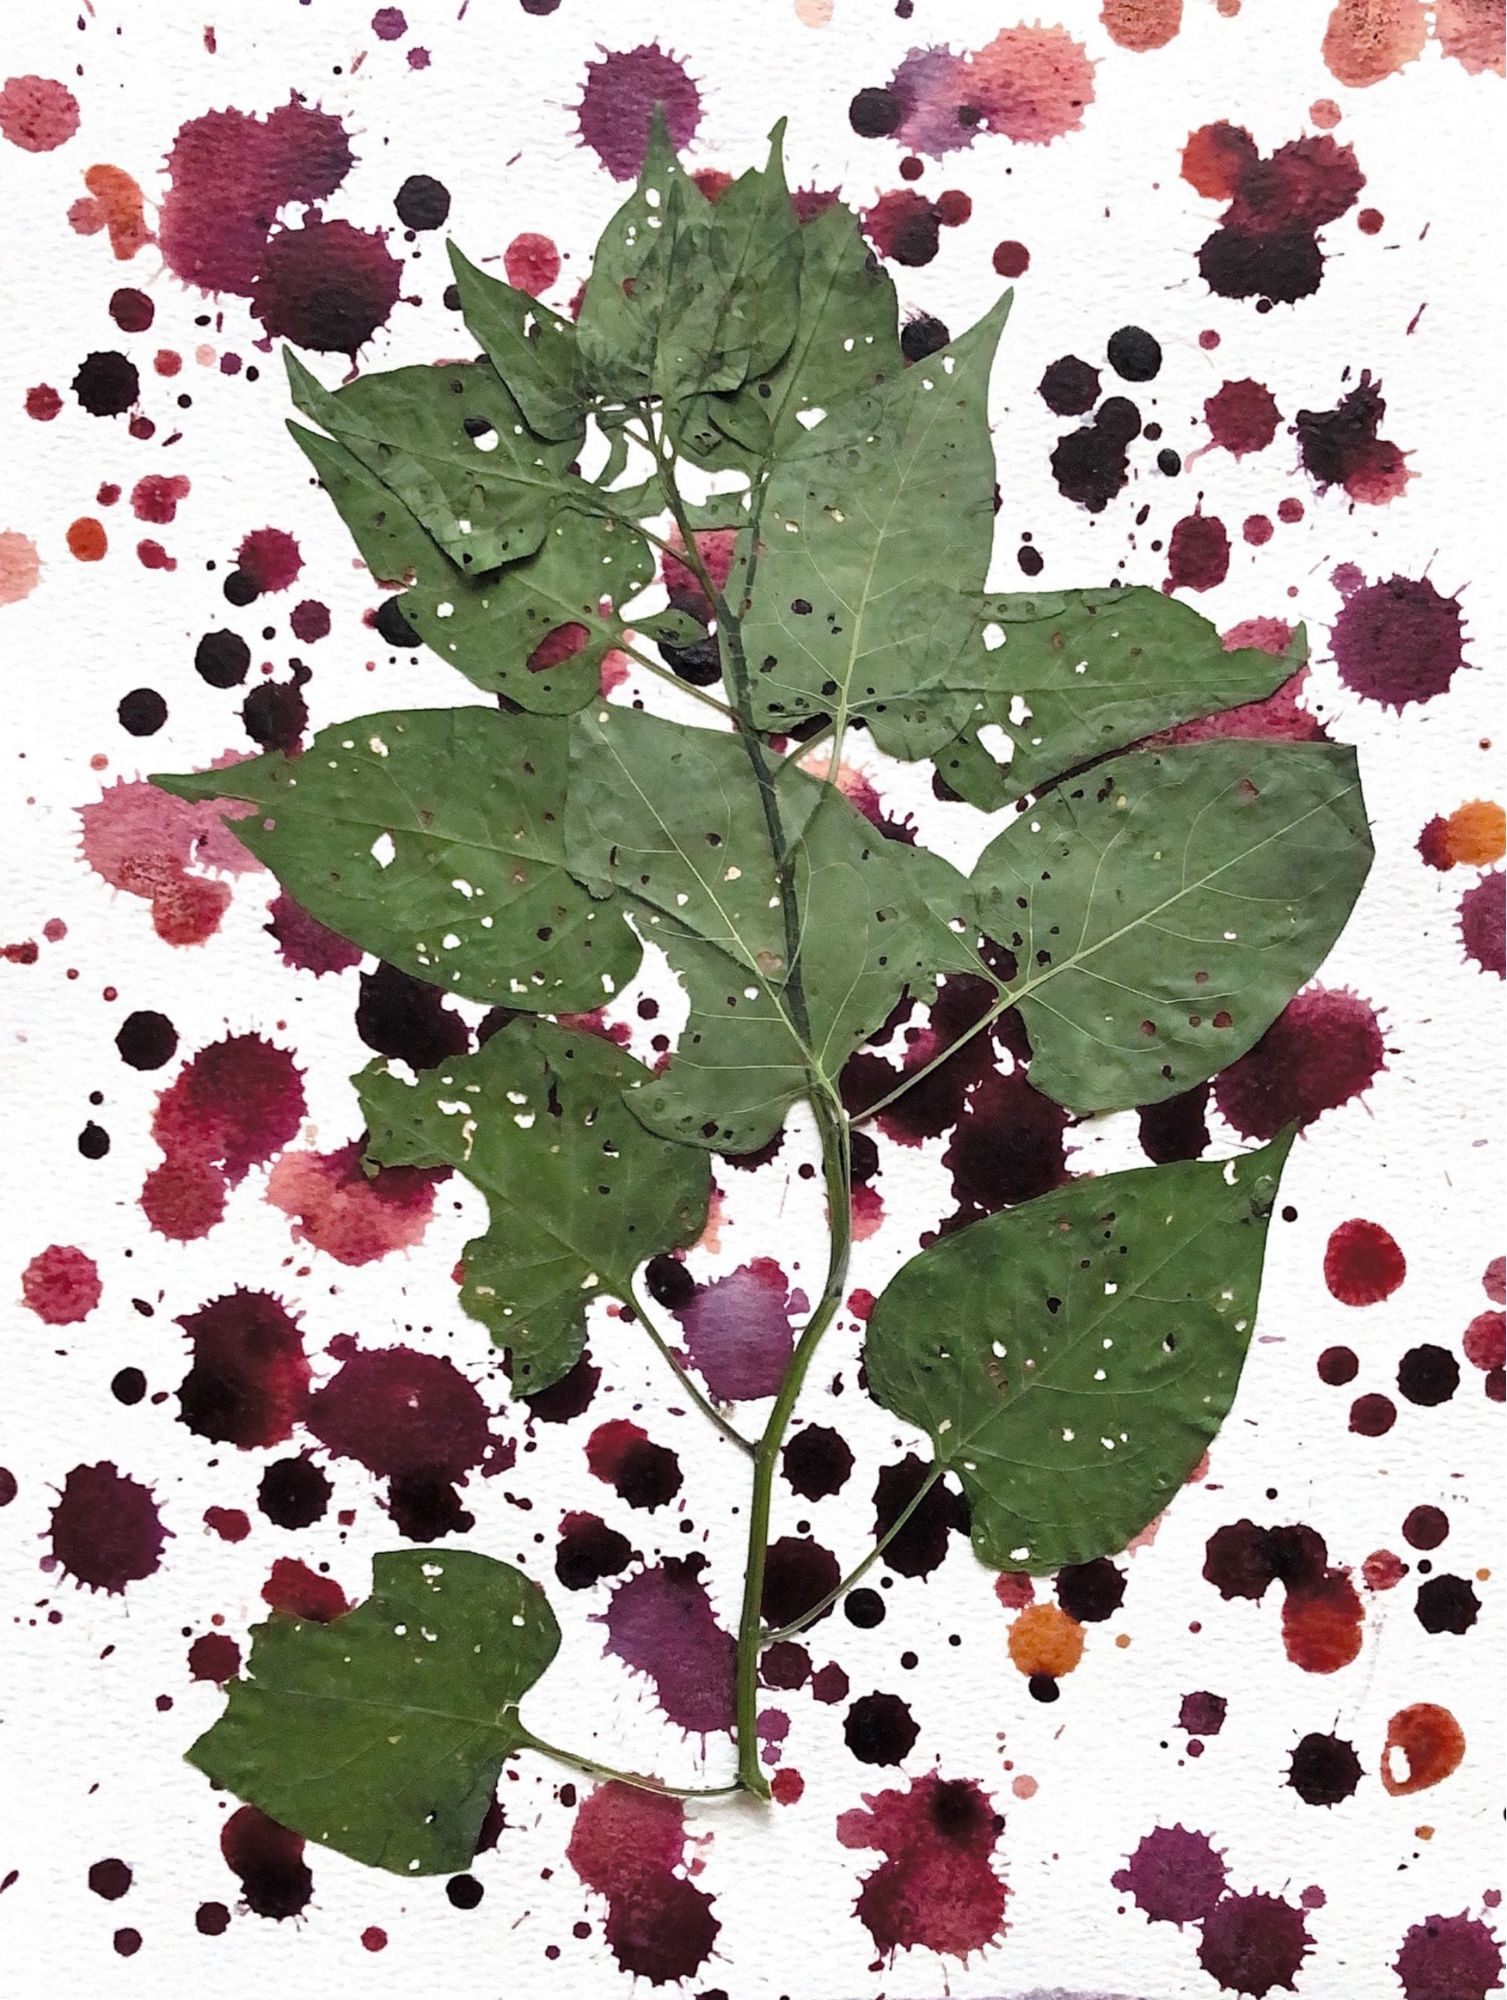 nightshae plant on a paper with paint splatters of different shades of red on the paper behind